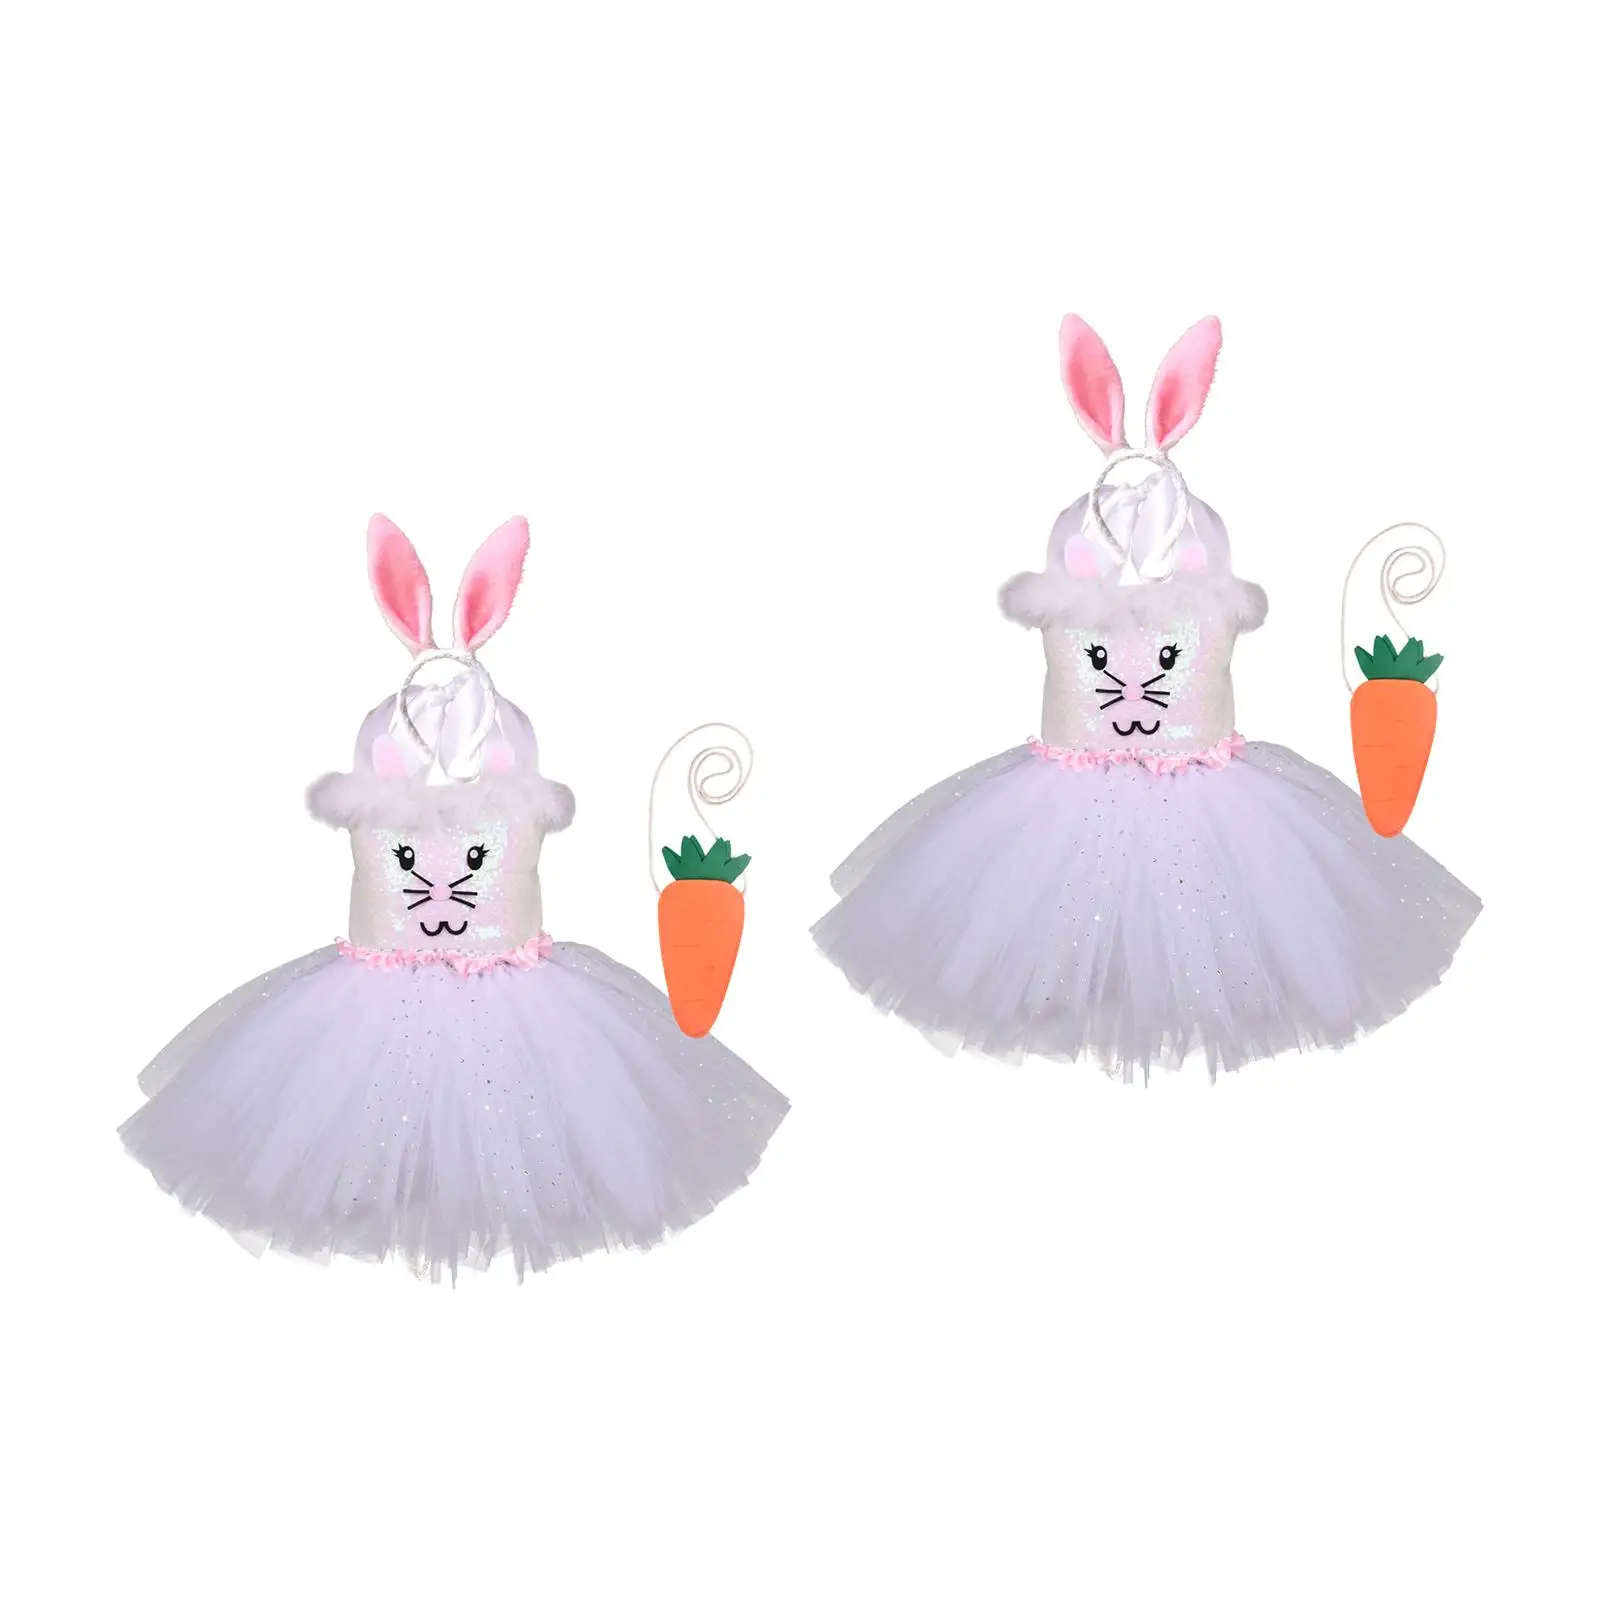 

Girl Easter Rabbit Costume Tutu Set Lovely Funny Gifts Sequin Bunny Ears Hair Hoop for Dancing Masquerade Party Prom Performance